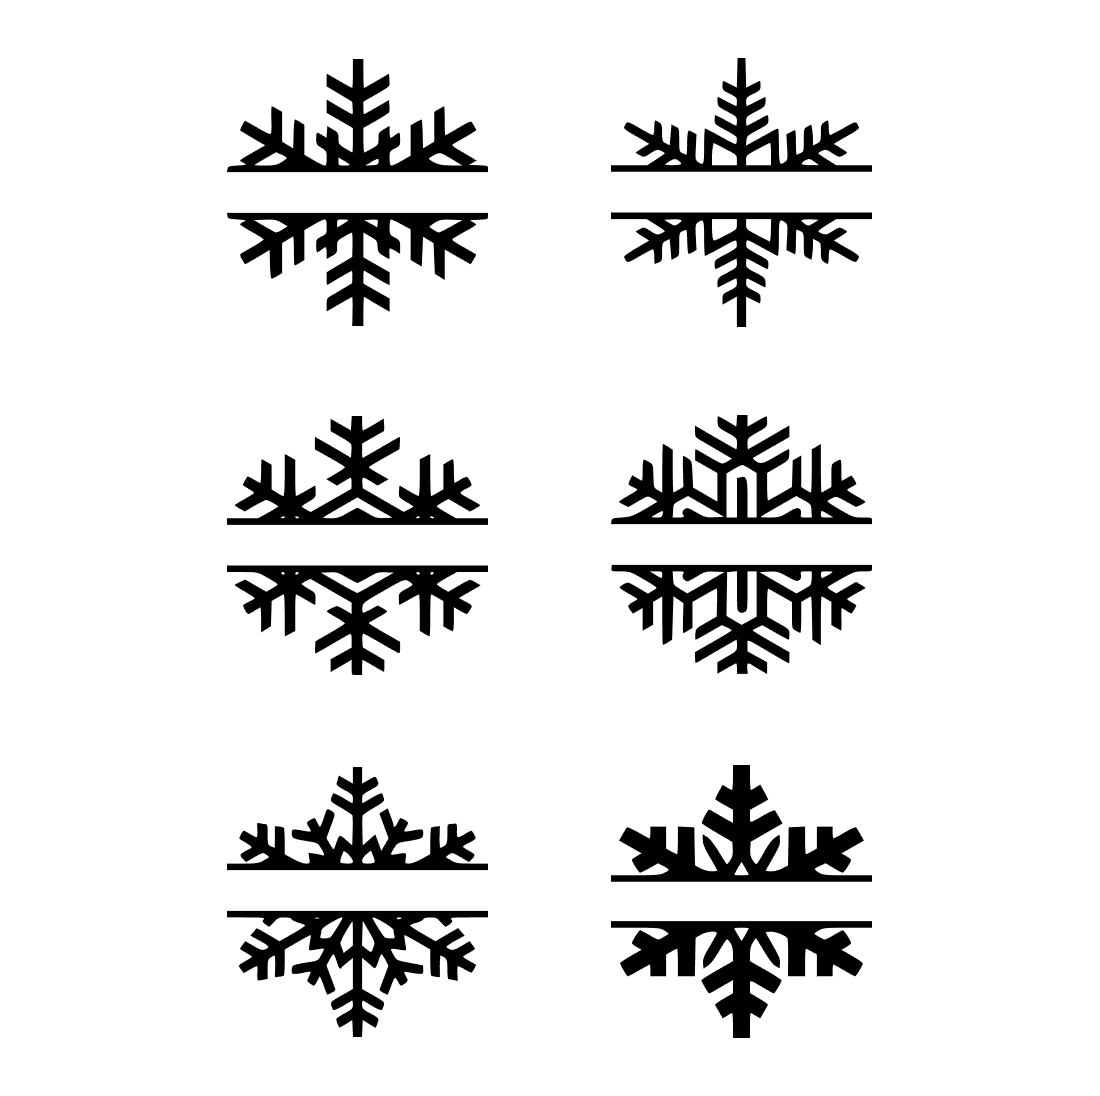 Diverse of snowflakes on the white background.